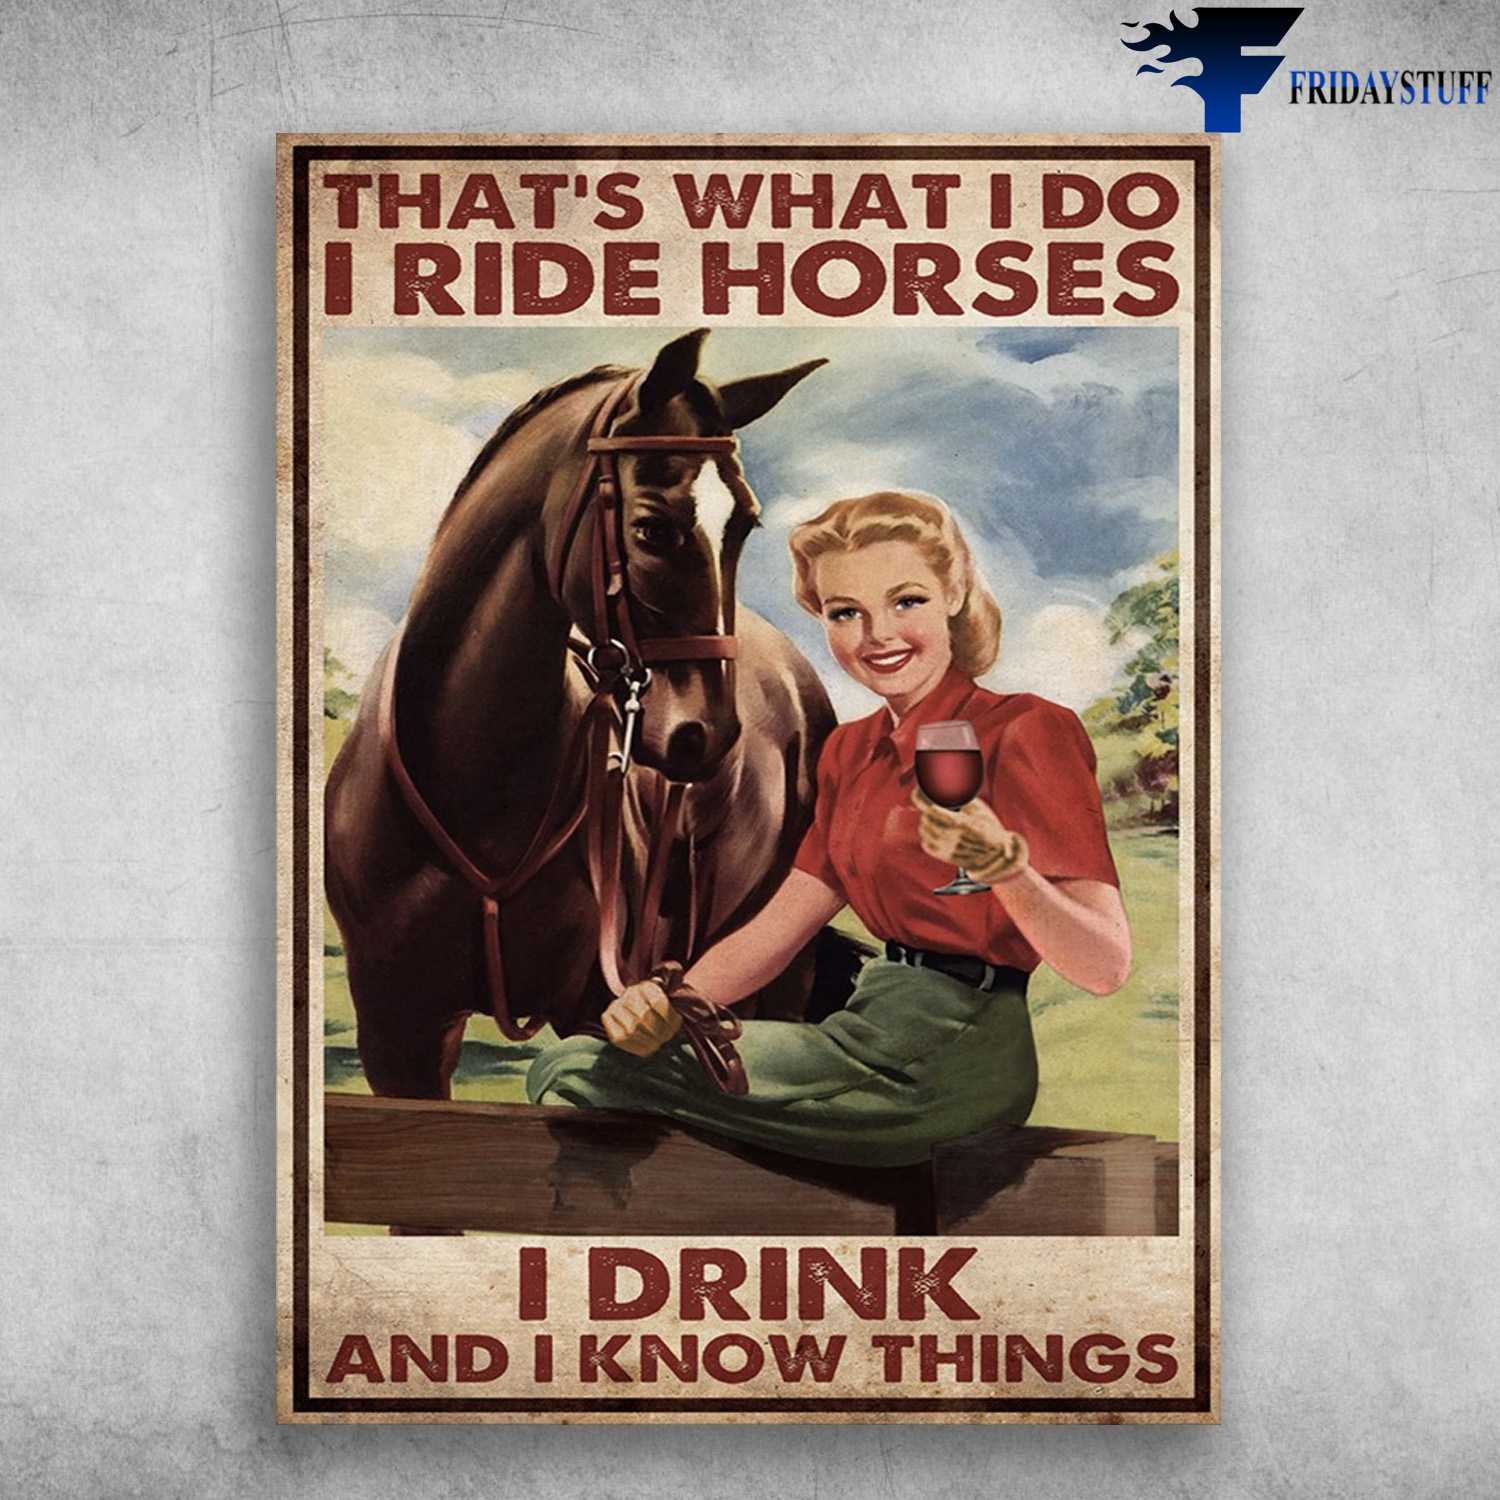 Lady Drinks Wine, Girl Horse - That's What I Do, I Ride Horses, I Drink, And I Know Things